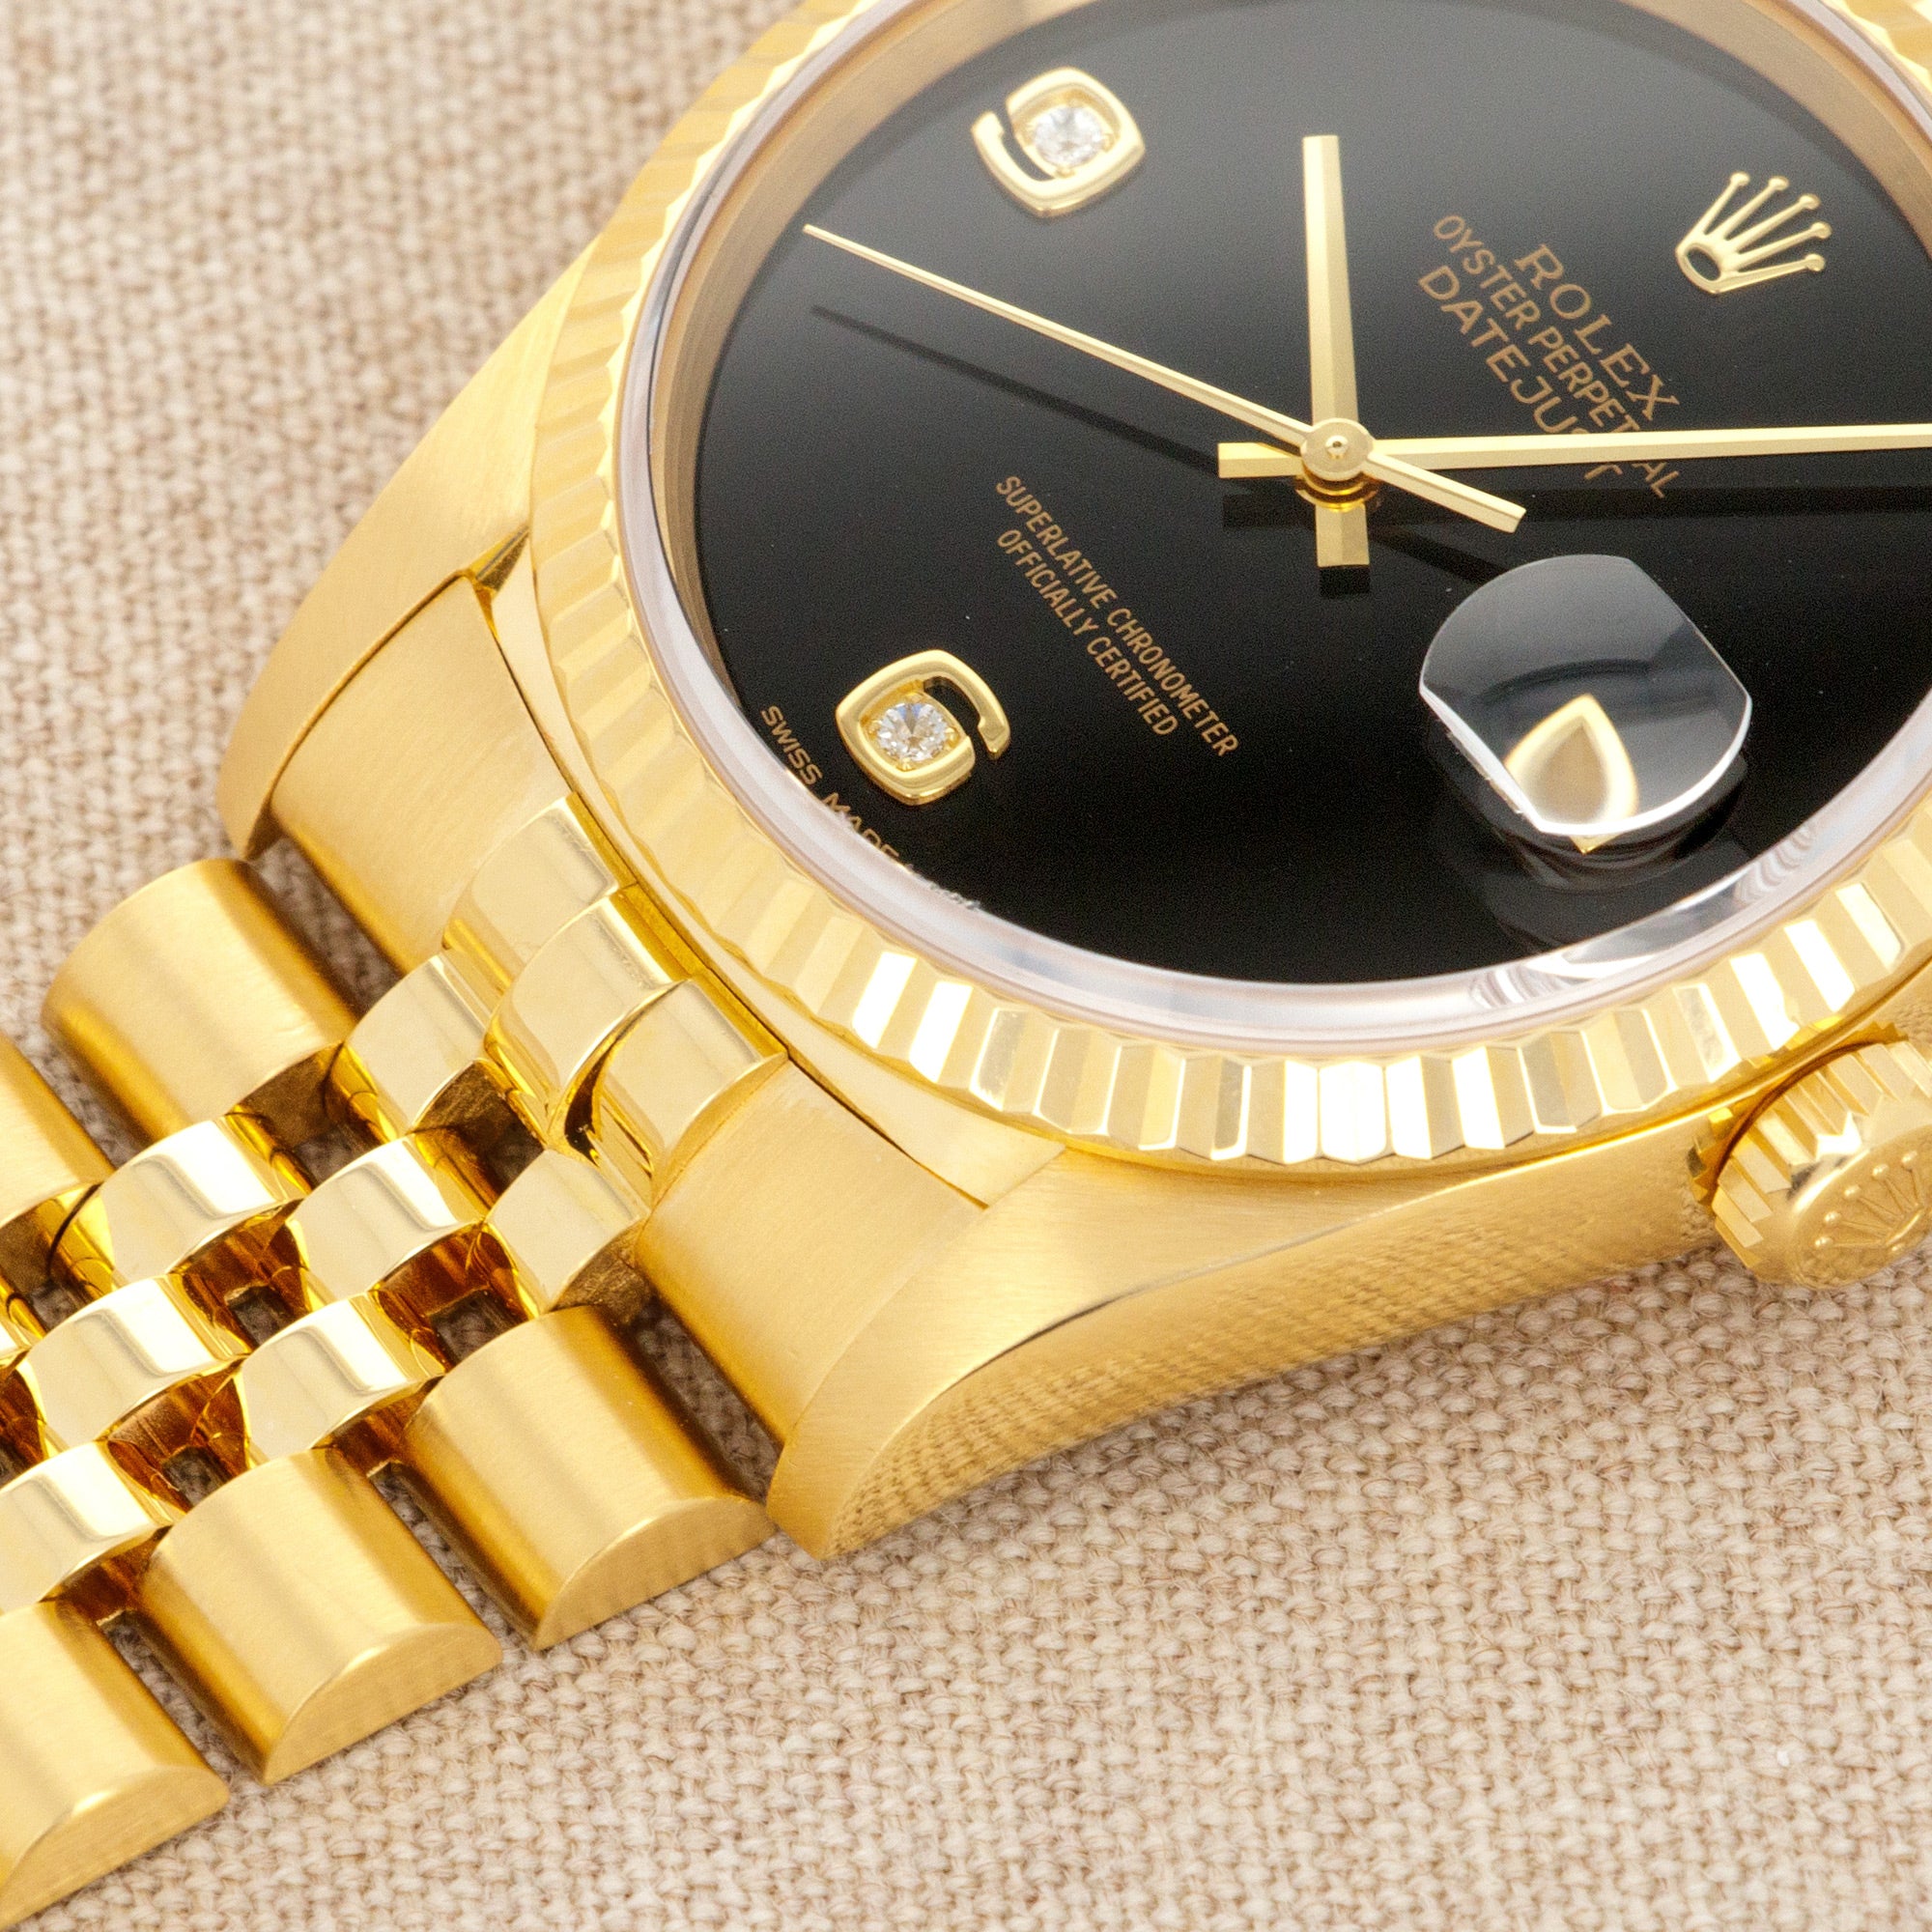 Rolex - Rolex Yellow Gold Datejust Ref. 16238 with Black Onyx Dial - The Keystone Watches